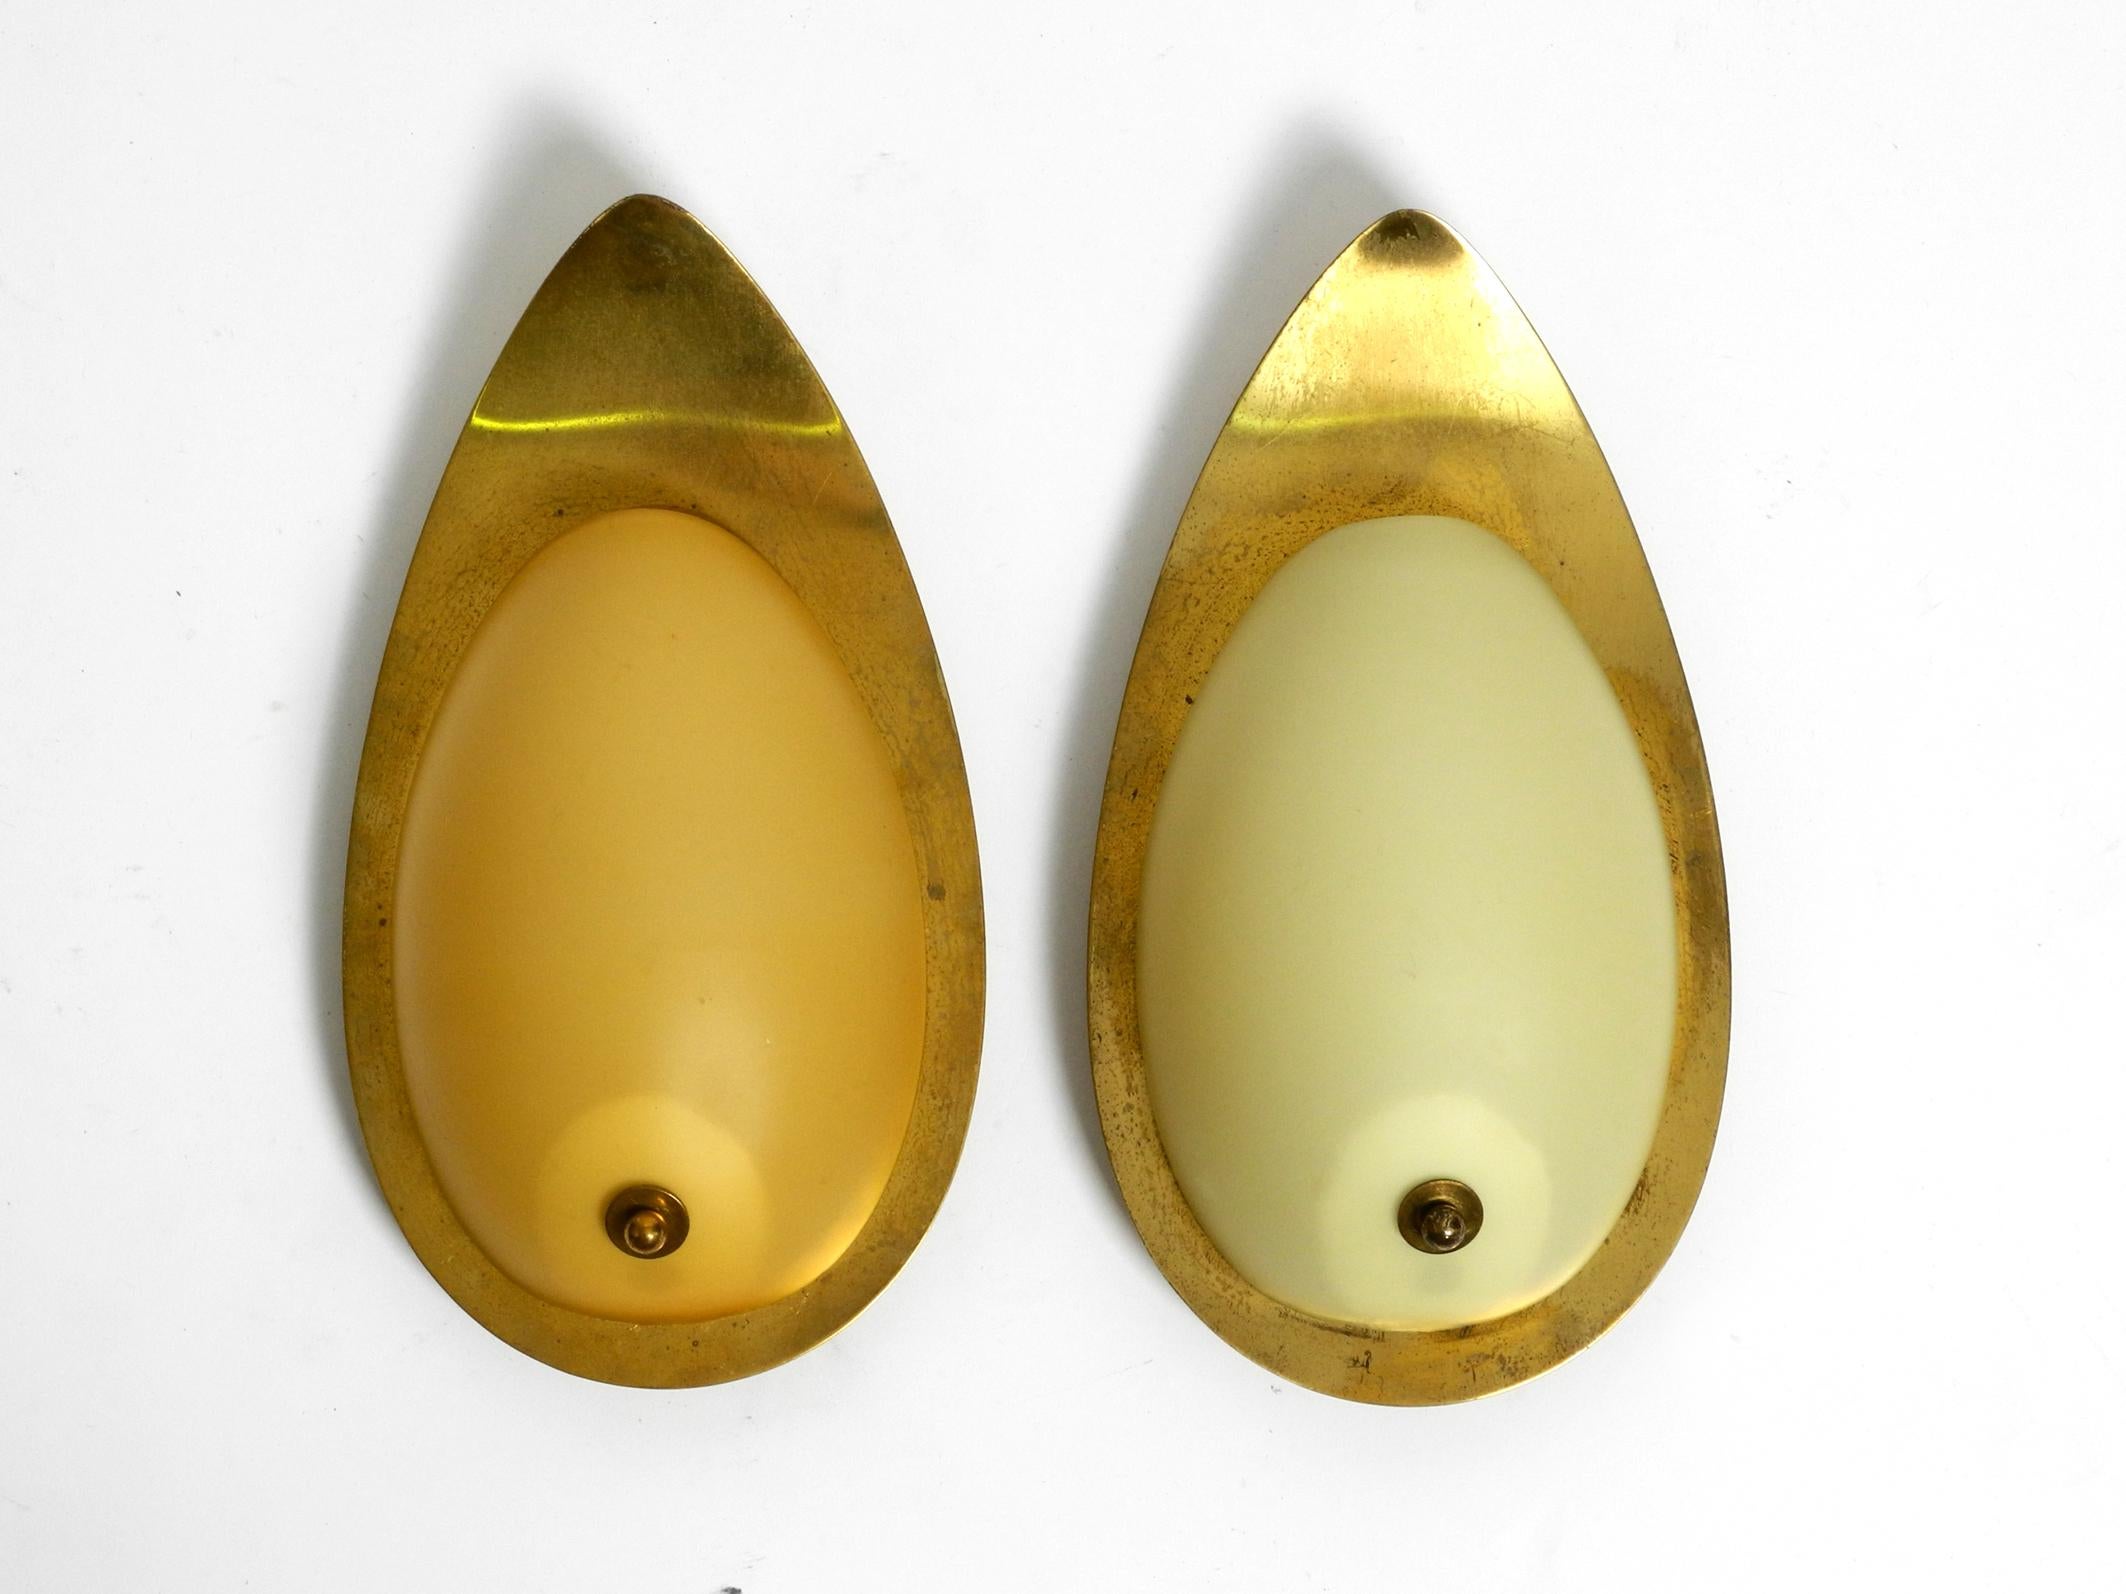 Pair of beautiful elegant mid-century brass sconces with beige glass shades .
Great elegant elaborate 1950s design. Made in Germany.
The frame is made of brass, the suspension on the back is made of another metal.
The shades are made of beige matt